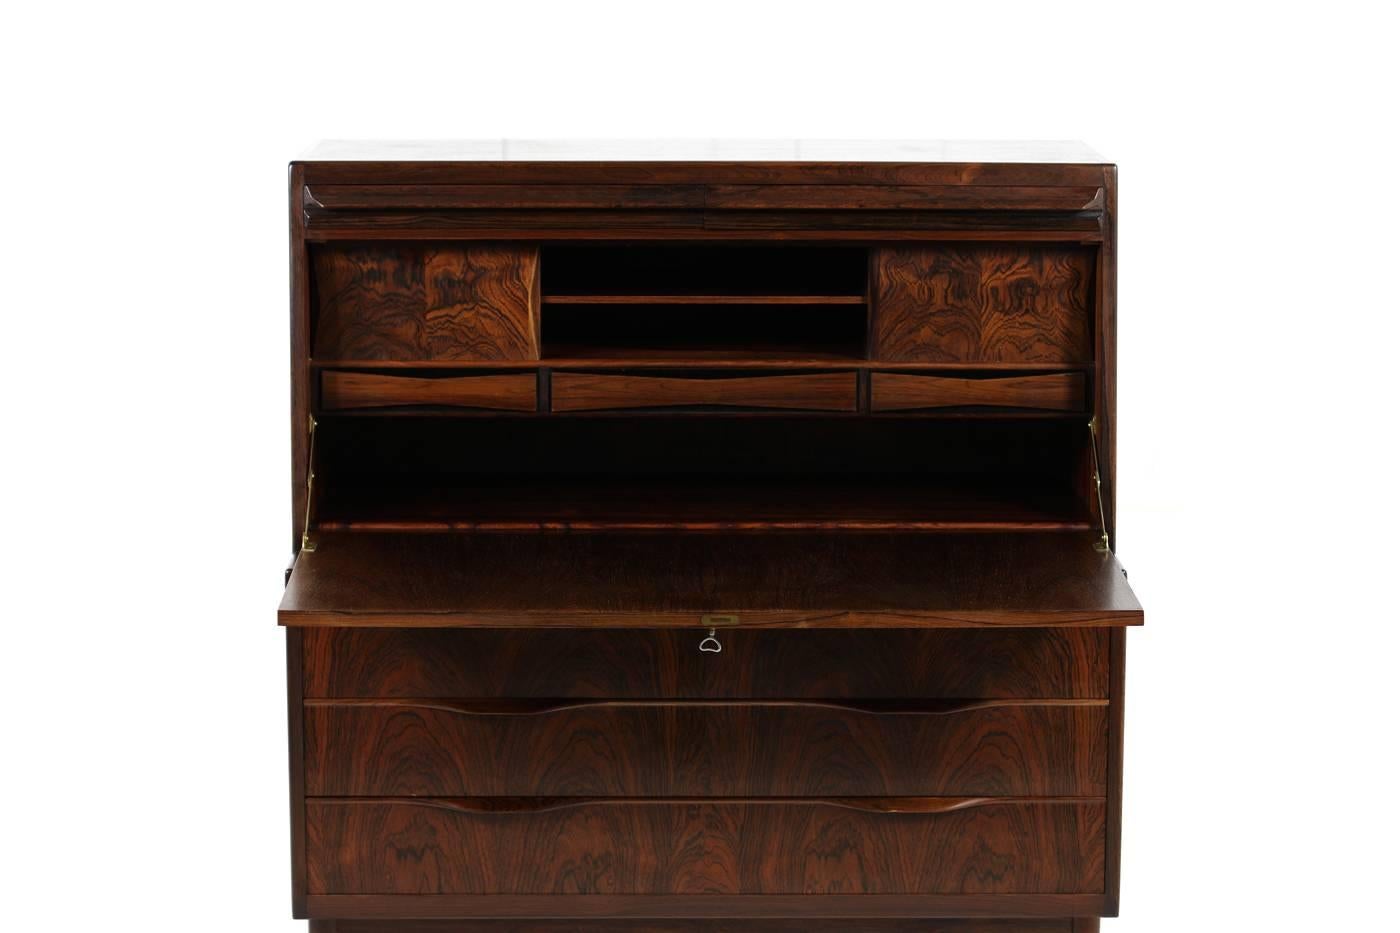 High Quality 1960s rosewood secretary, made in Denmark, Mid-Century Modern design by Erling Torvits for Klim Mobelfabrik. Rosewood and brass details, three large drawers, two hidden drawers and also three further drawers inside with two sliding